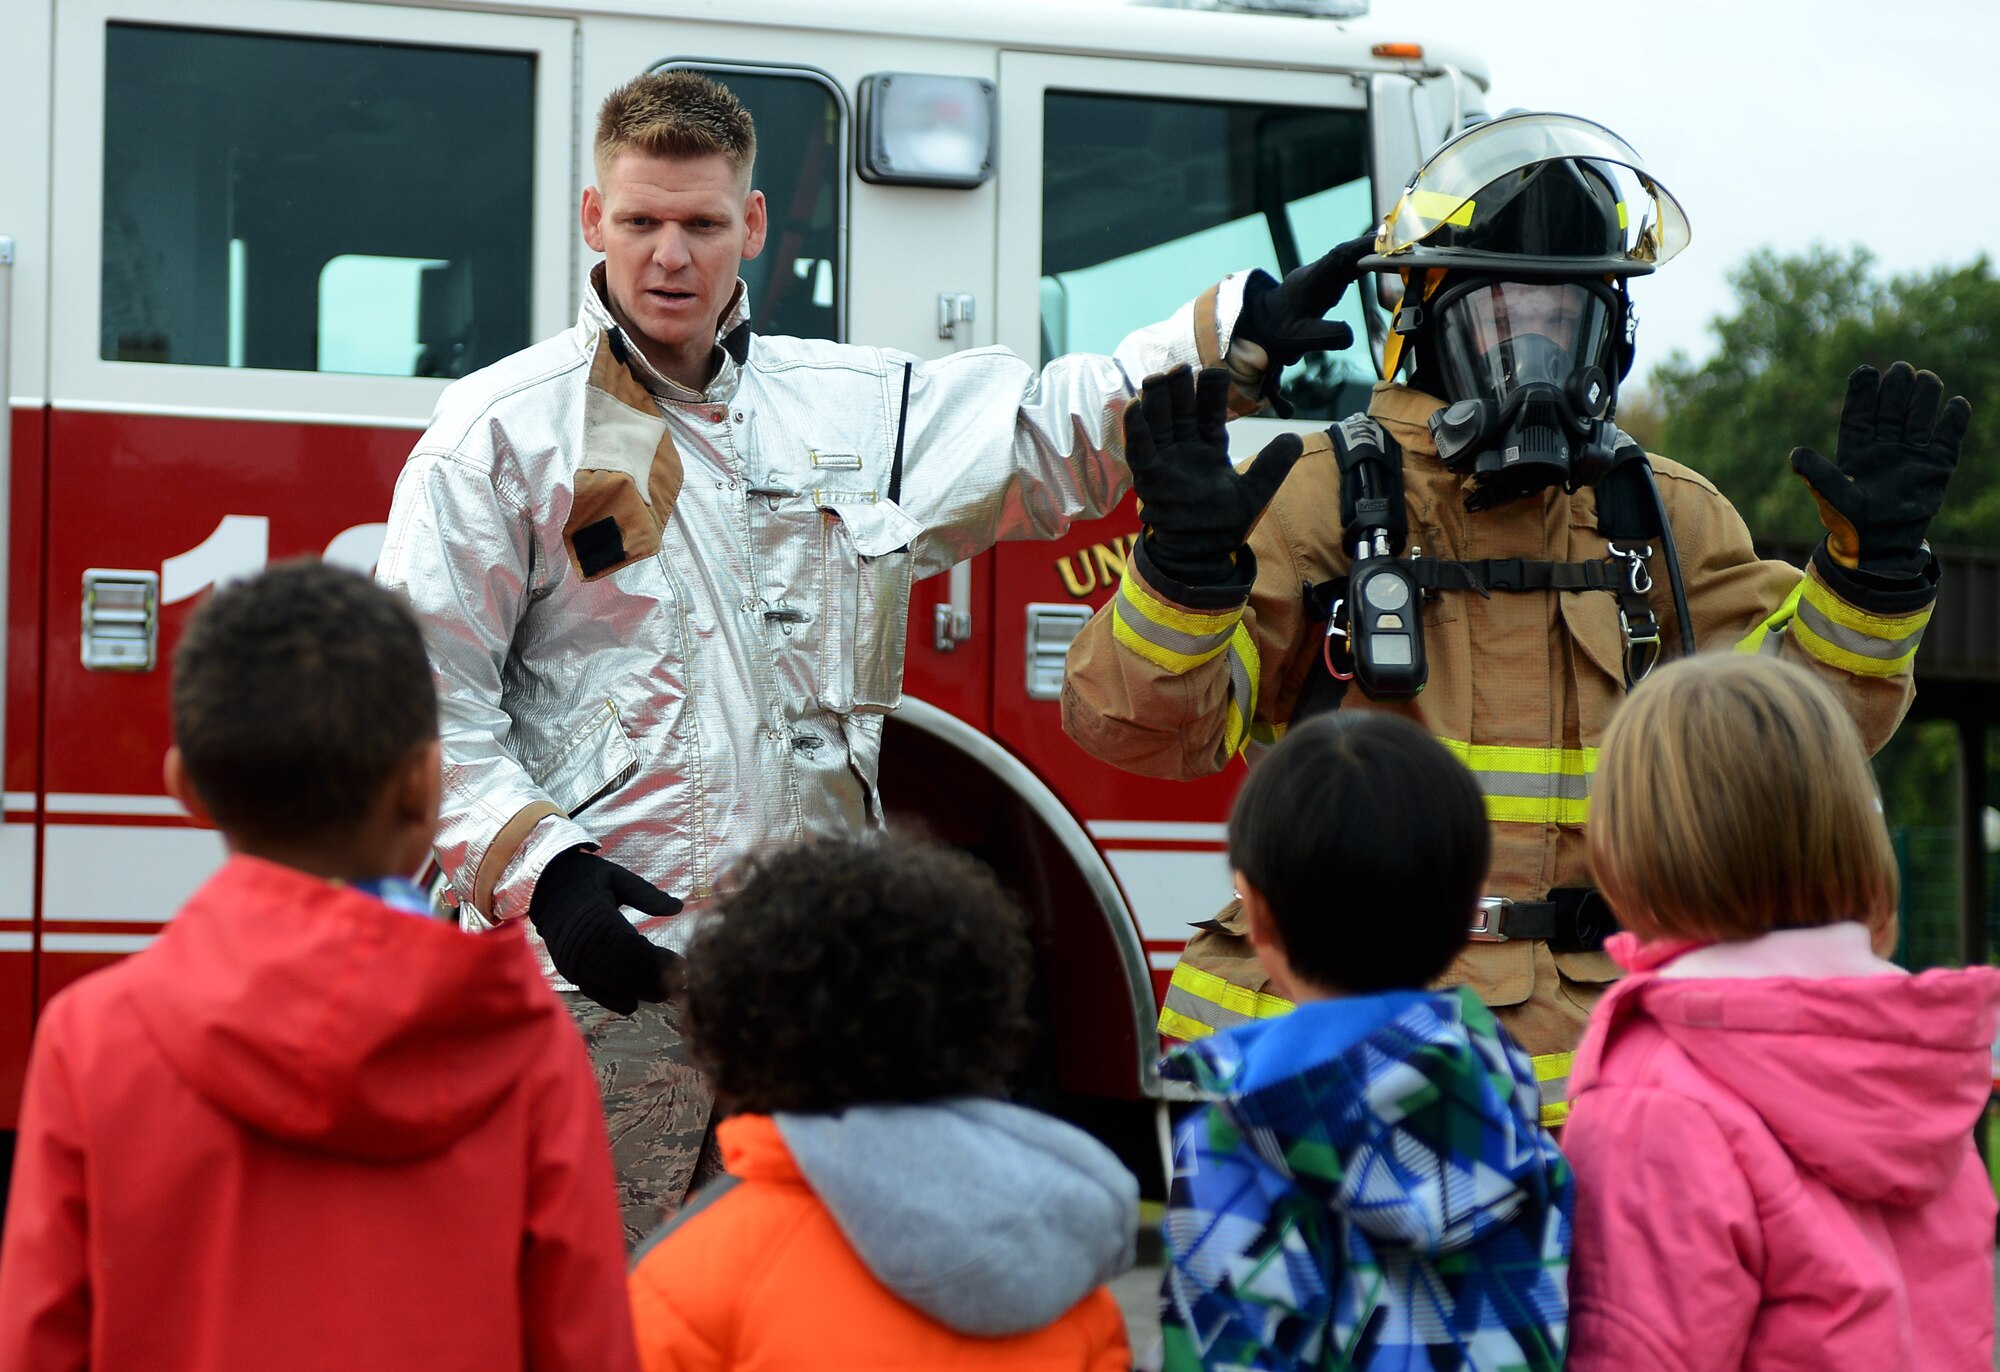 U.S. Air Force Tech. Sgt. Andrew J. Kehl, a 52nd Civil Engineer Squadron firefighter and native of Palm Springs, Calif., teams up with U.S. Air Force Airman 1st Class Daniel R. Prokowich, 52nd CES firefighter and native of Clermont, Calif., to show Spangdahlem Elementary School students firefighter equipment while visiting SES on Spangdahlem Air Base, Germany, Oct. 8, 2014. The additional gear a firefighter wears weighs approximately 75 pounds. (U.S. Air Force photo by Airman 1st Class Luke J. Kitterman/Released)